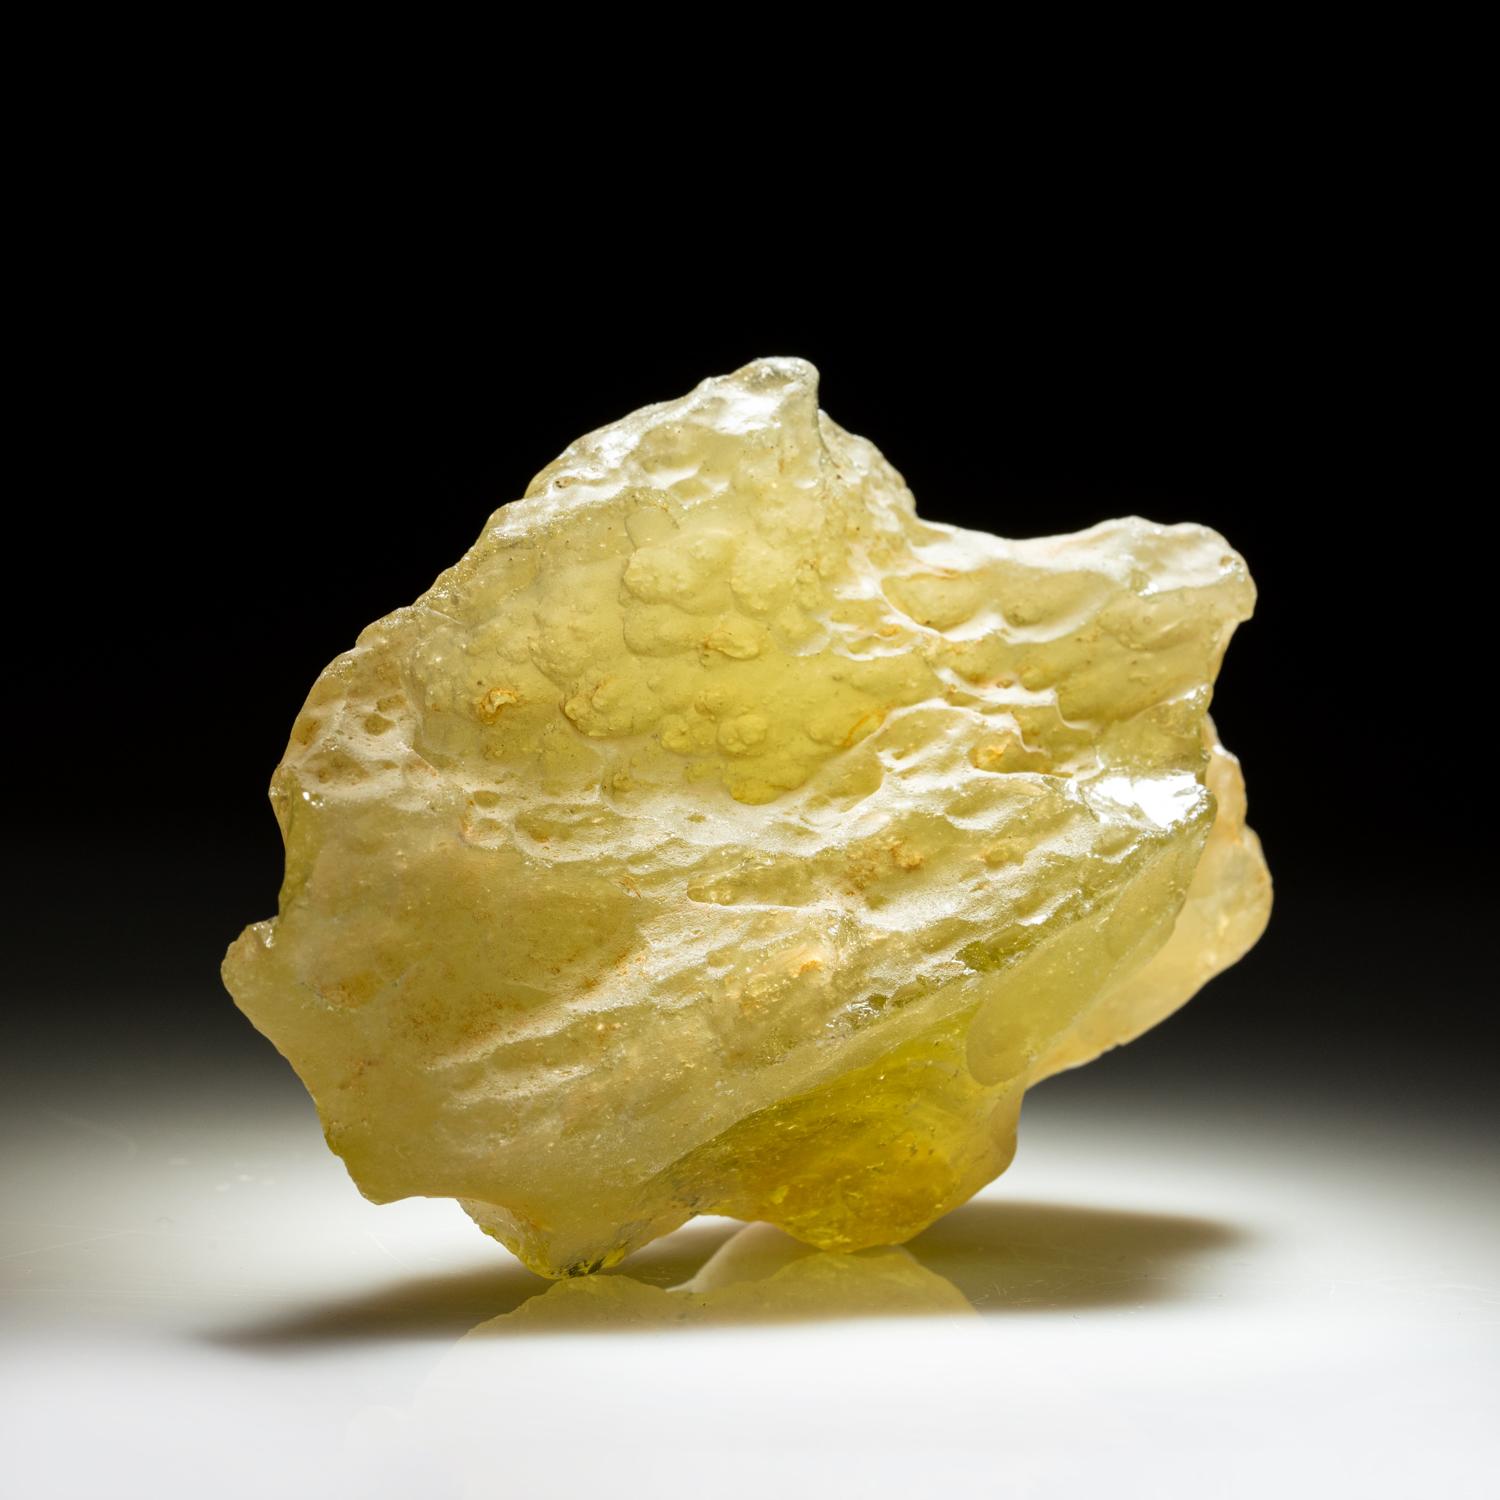 Libyan Desert Glass is a substance found in areas in the eastern Sahara, in the deserts of eastern Libya and western Egypt. Fragments of desert glass can be found over areas of tens of square kilometers.  It has been dated as having formed about 26